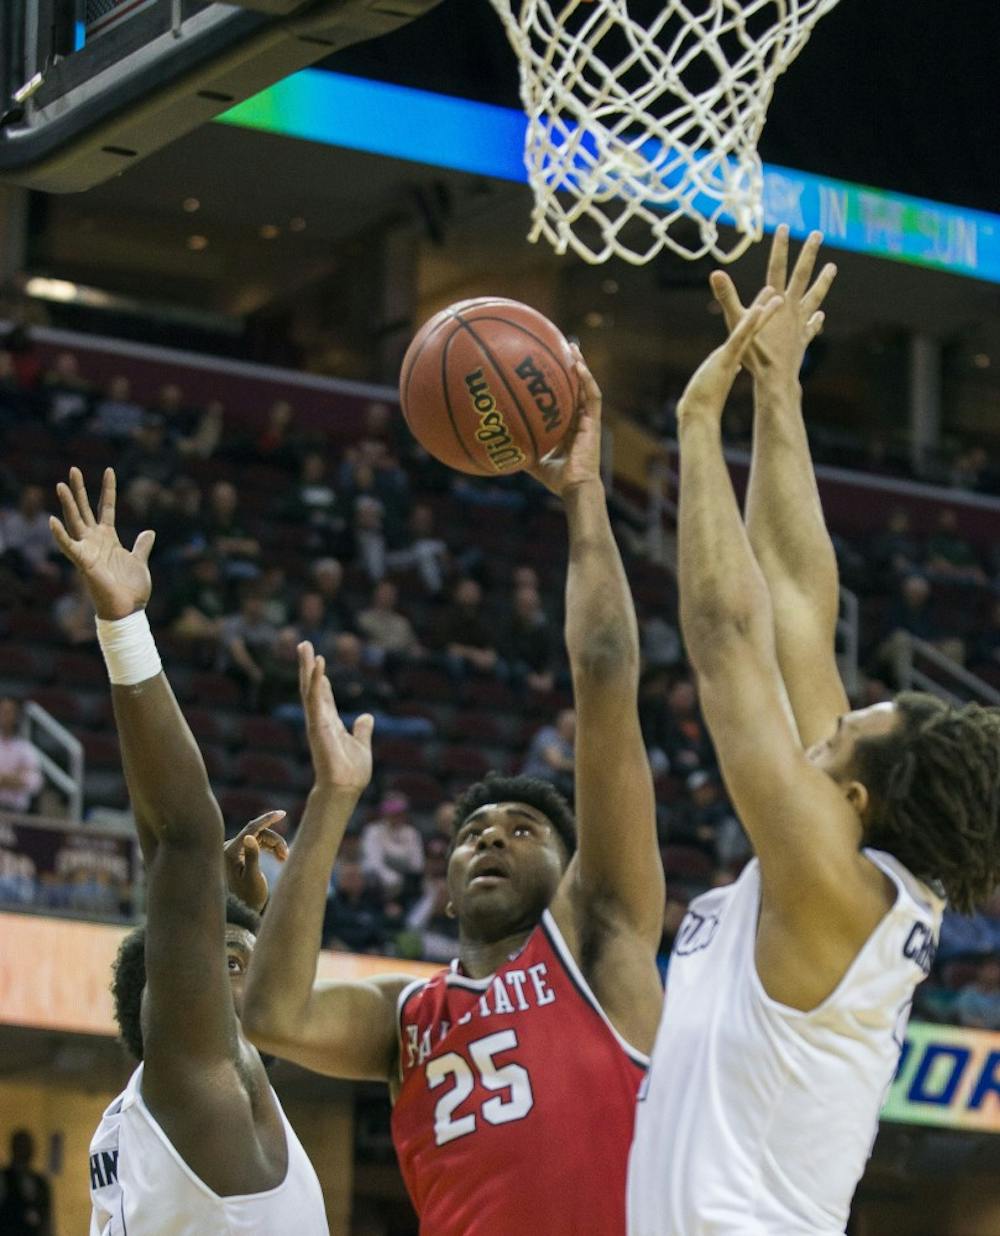 Ball State men's basketball looks ahead at the future